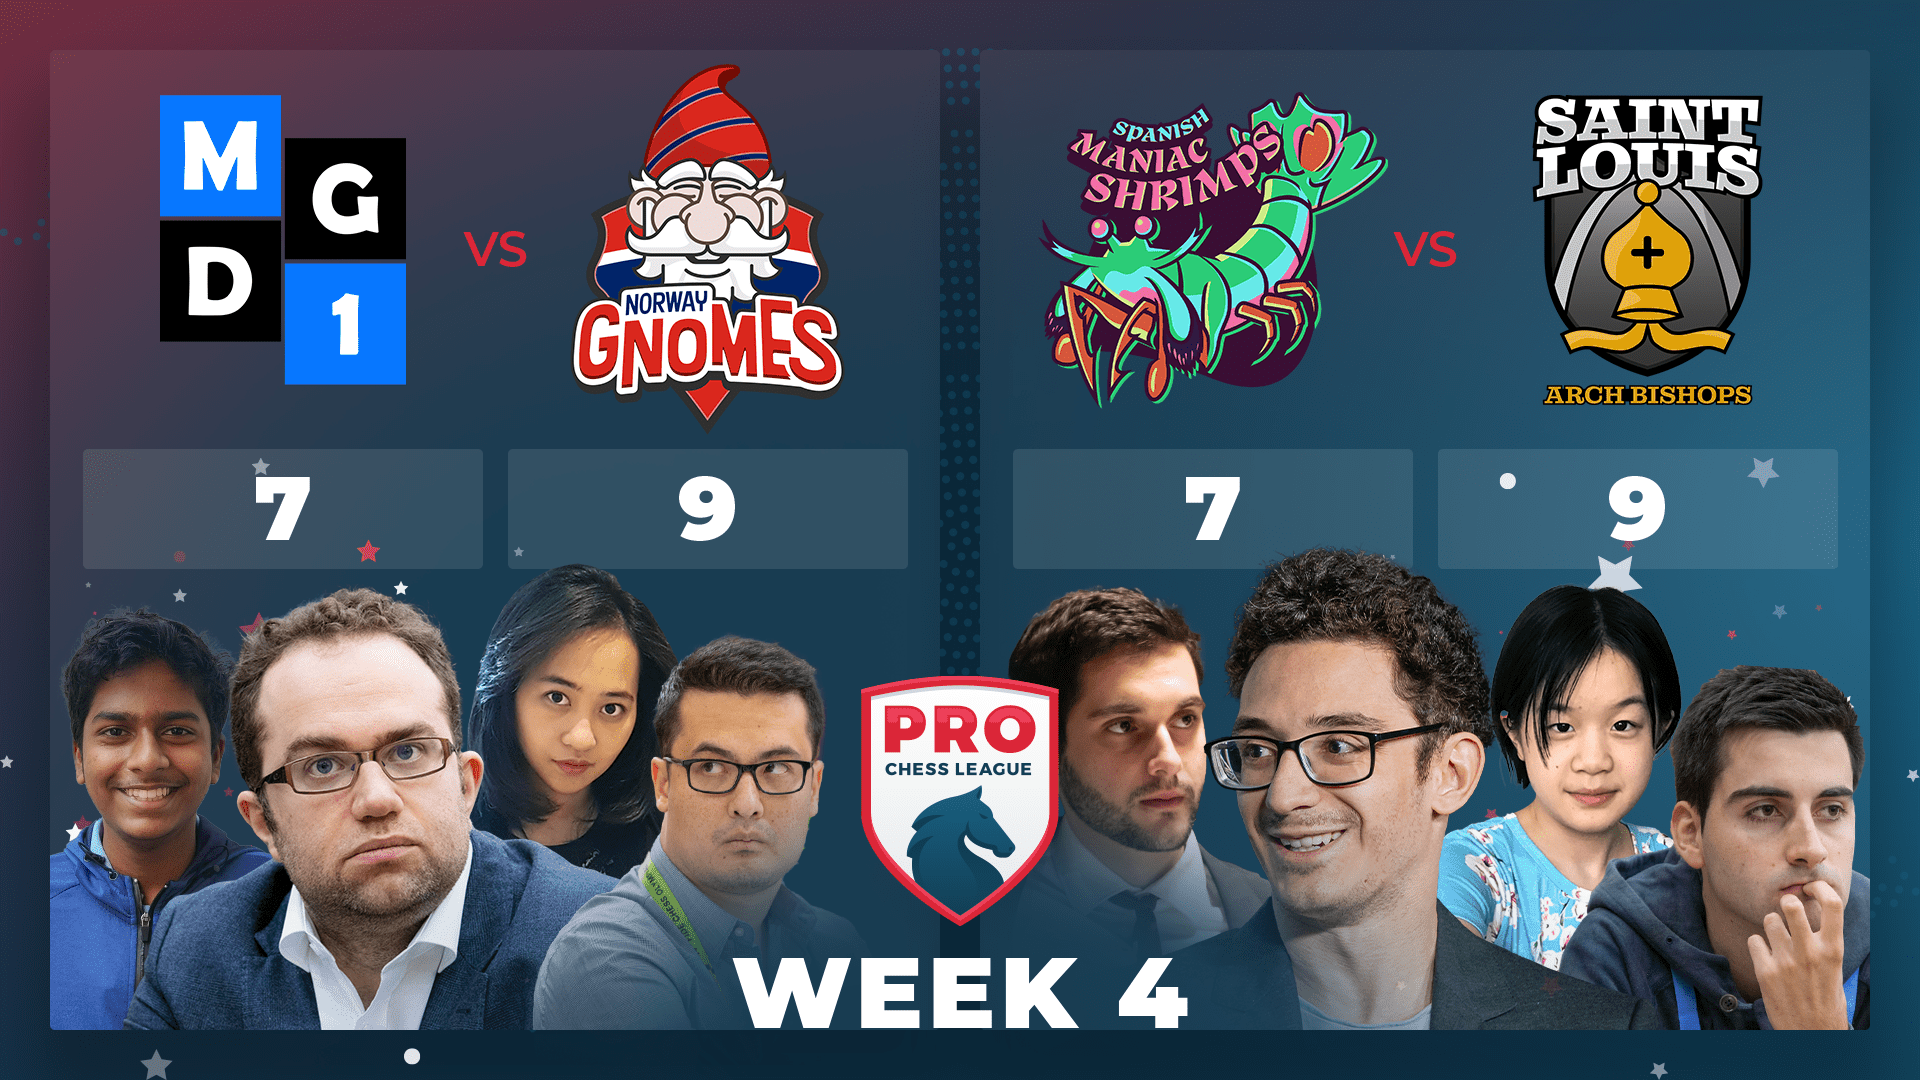 Norway Gnomes Qualify For Playoffs; Arch Bishops Cook Shrimps